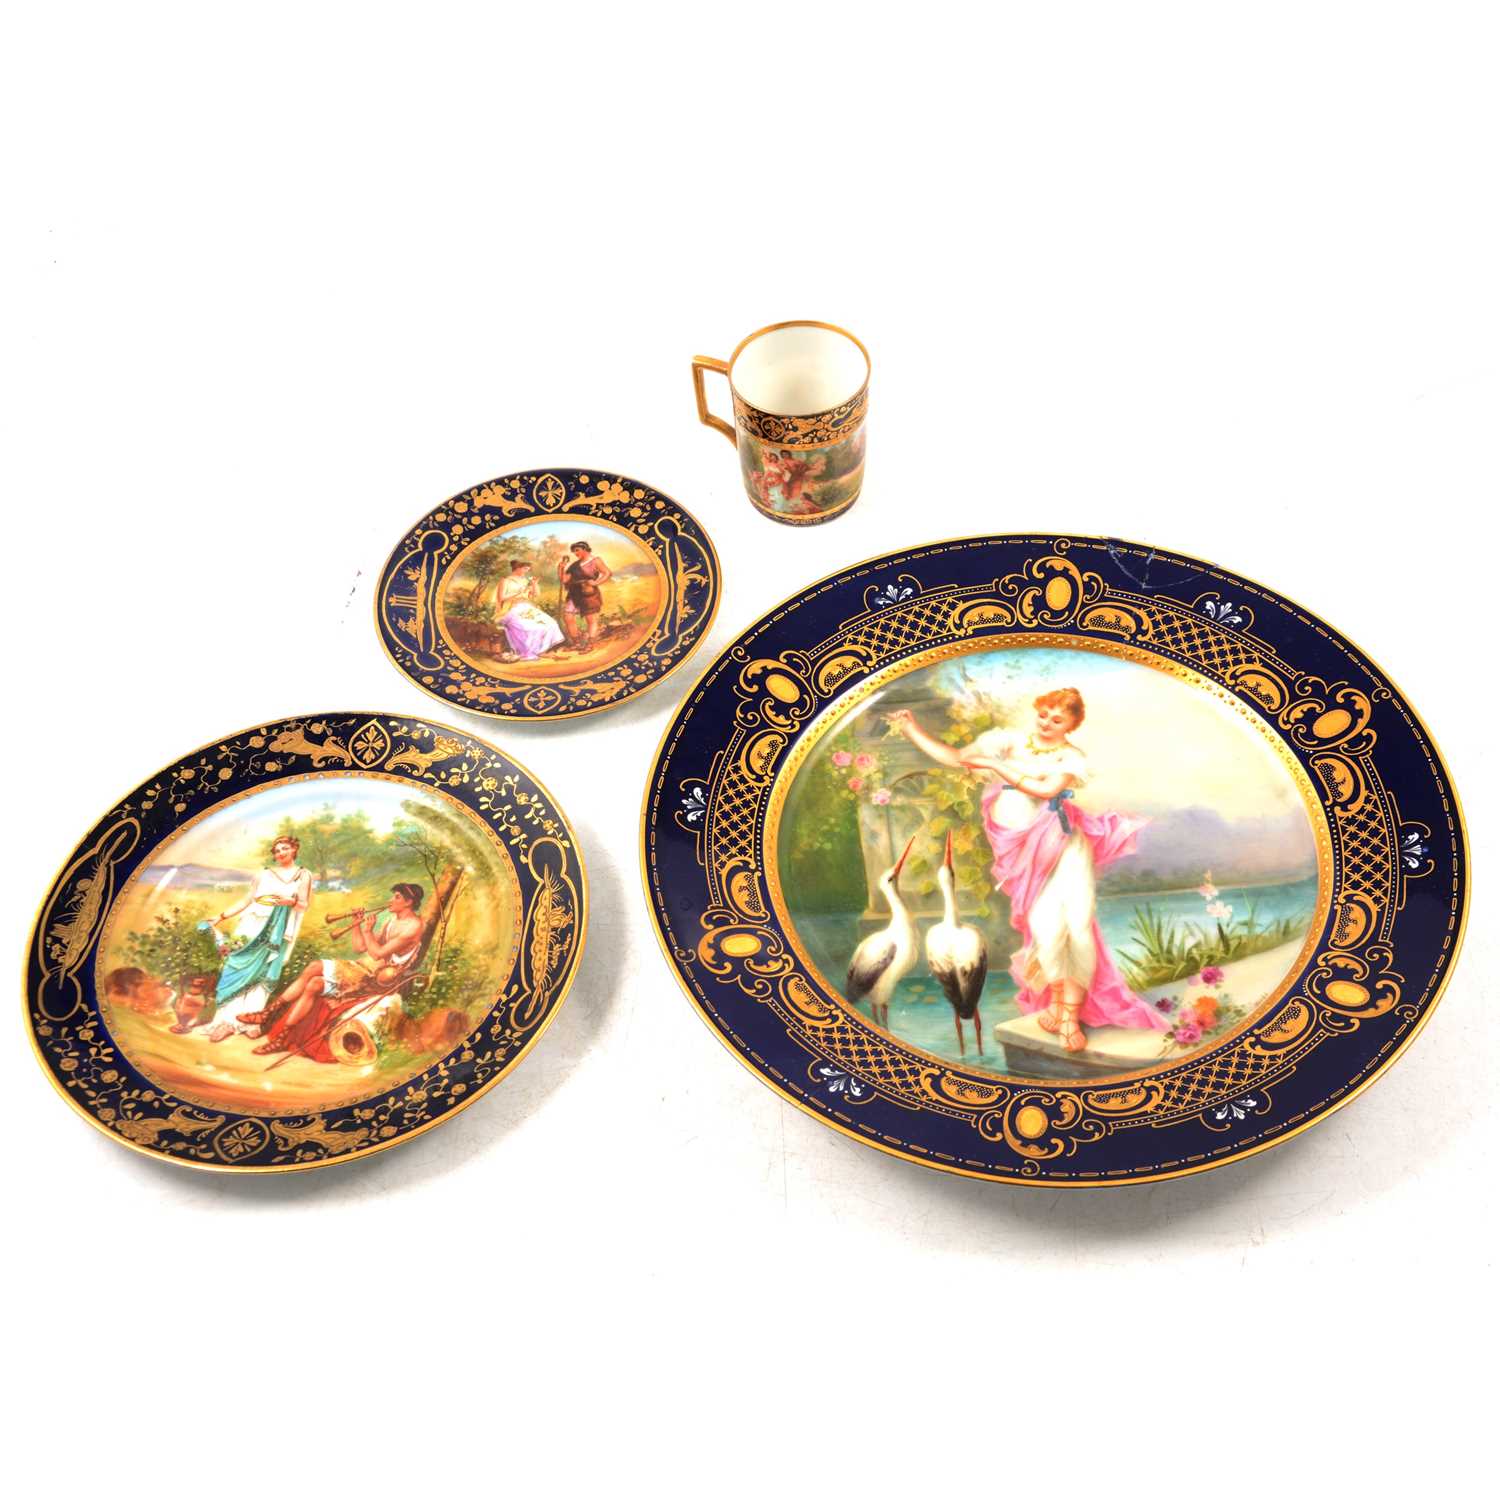 Lot 12 - Pair of Royal Vienna decorative trios, and a hand-painted cabinet plate